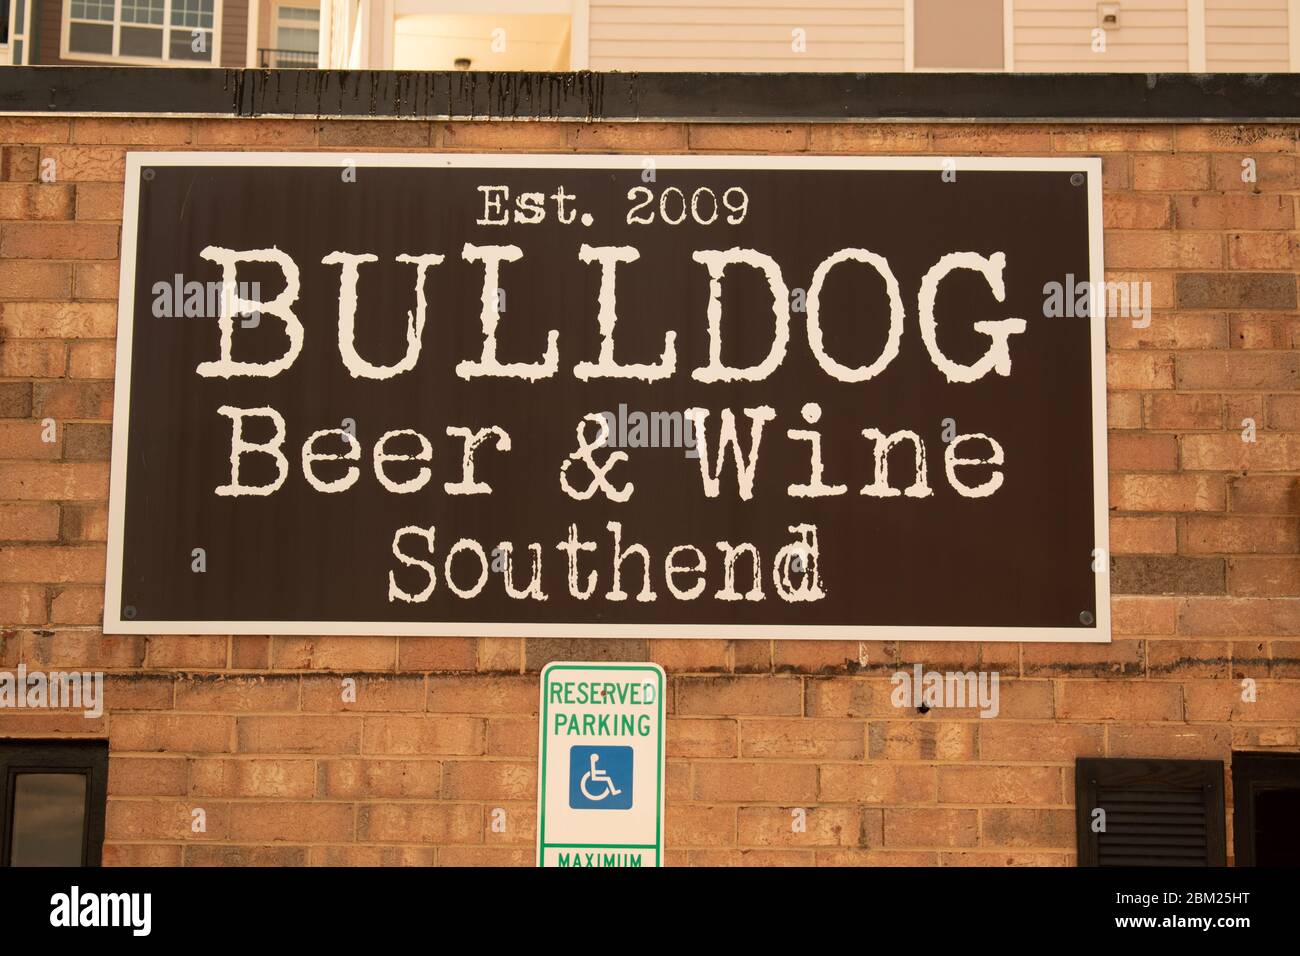 Charlotte, NC/USA - May 14, 2019: Brand signage for 'Bulldog Beer & Wine Southend' on the  facade of the brick building in black and white.  Establish Stock Photo